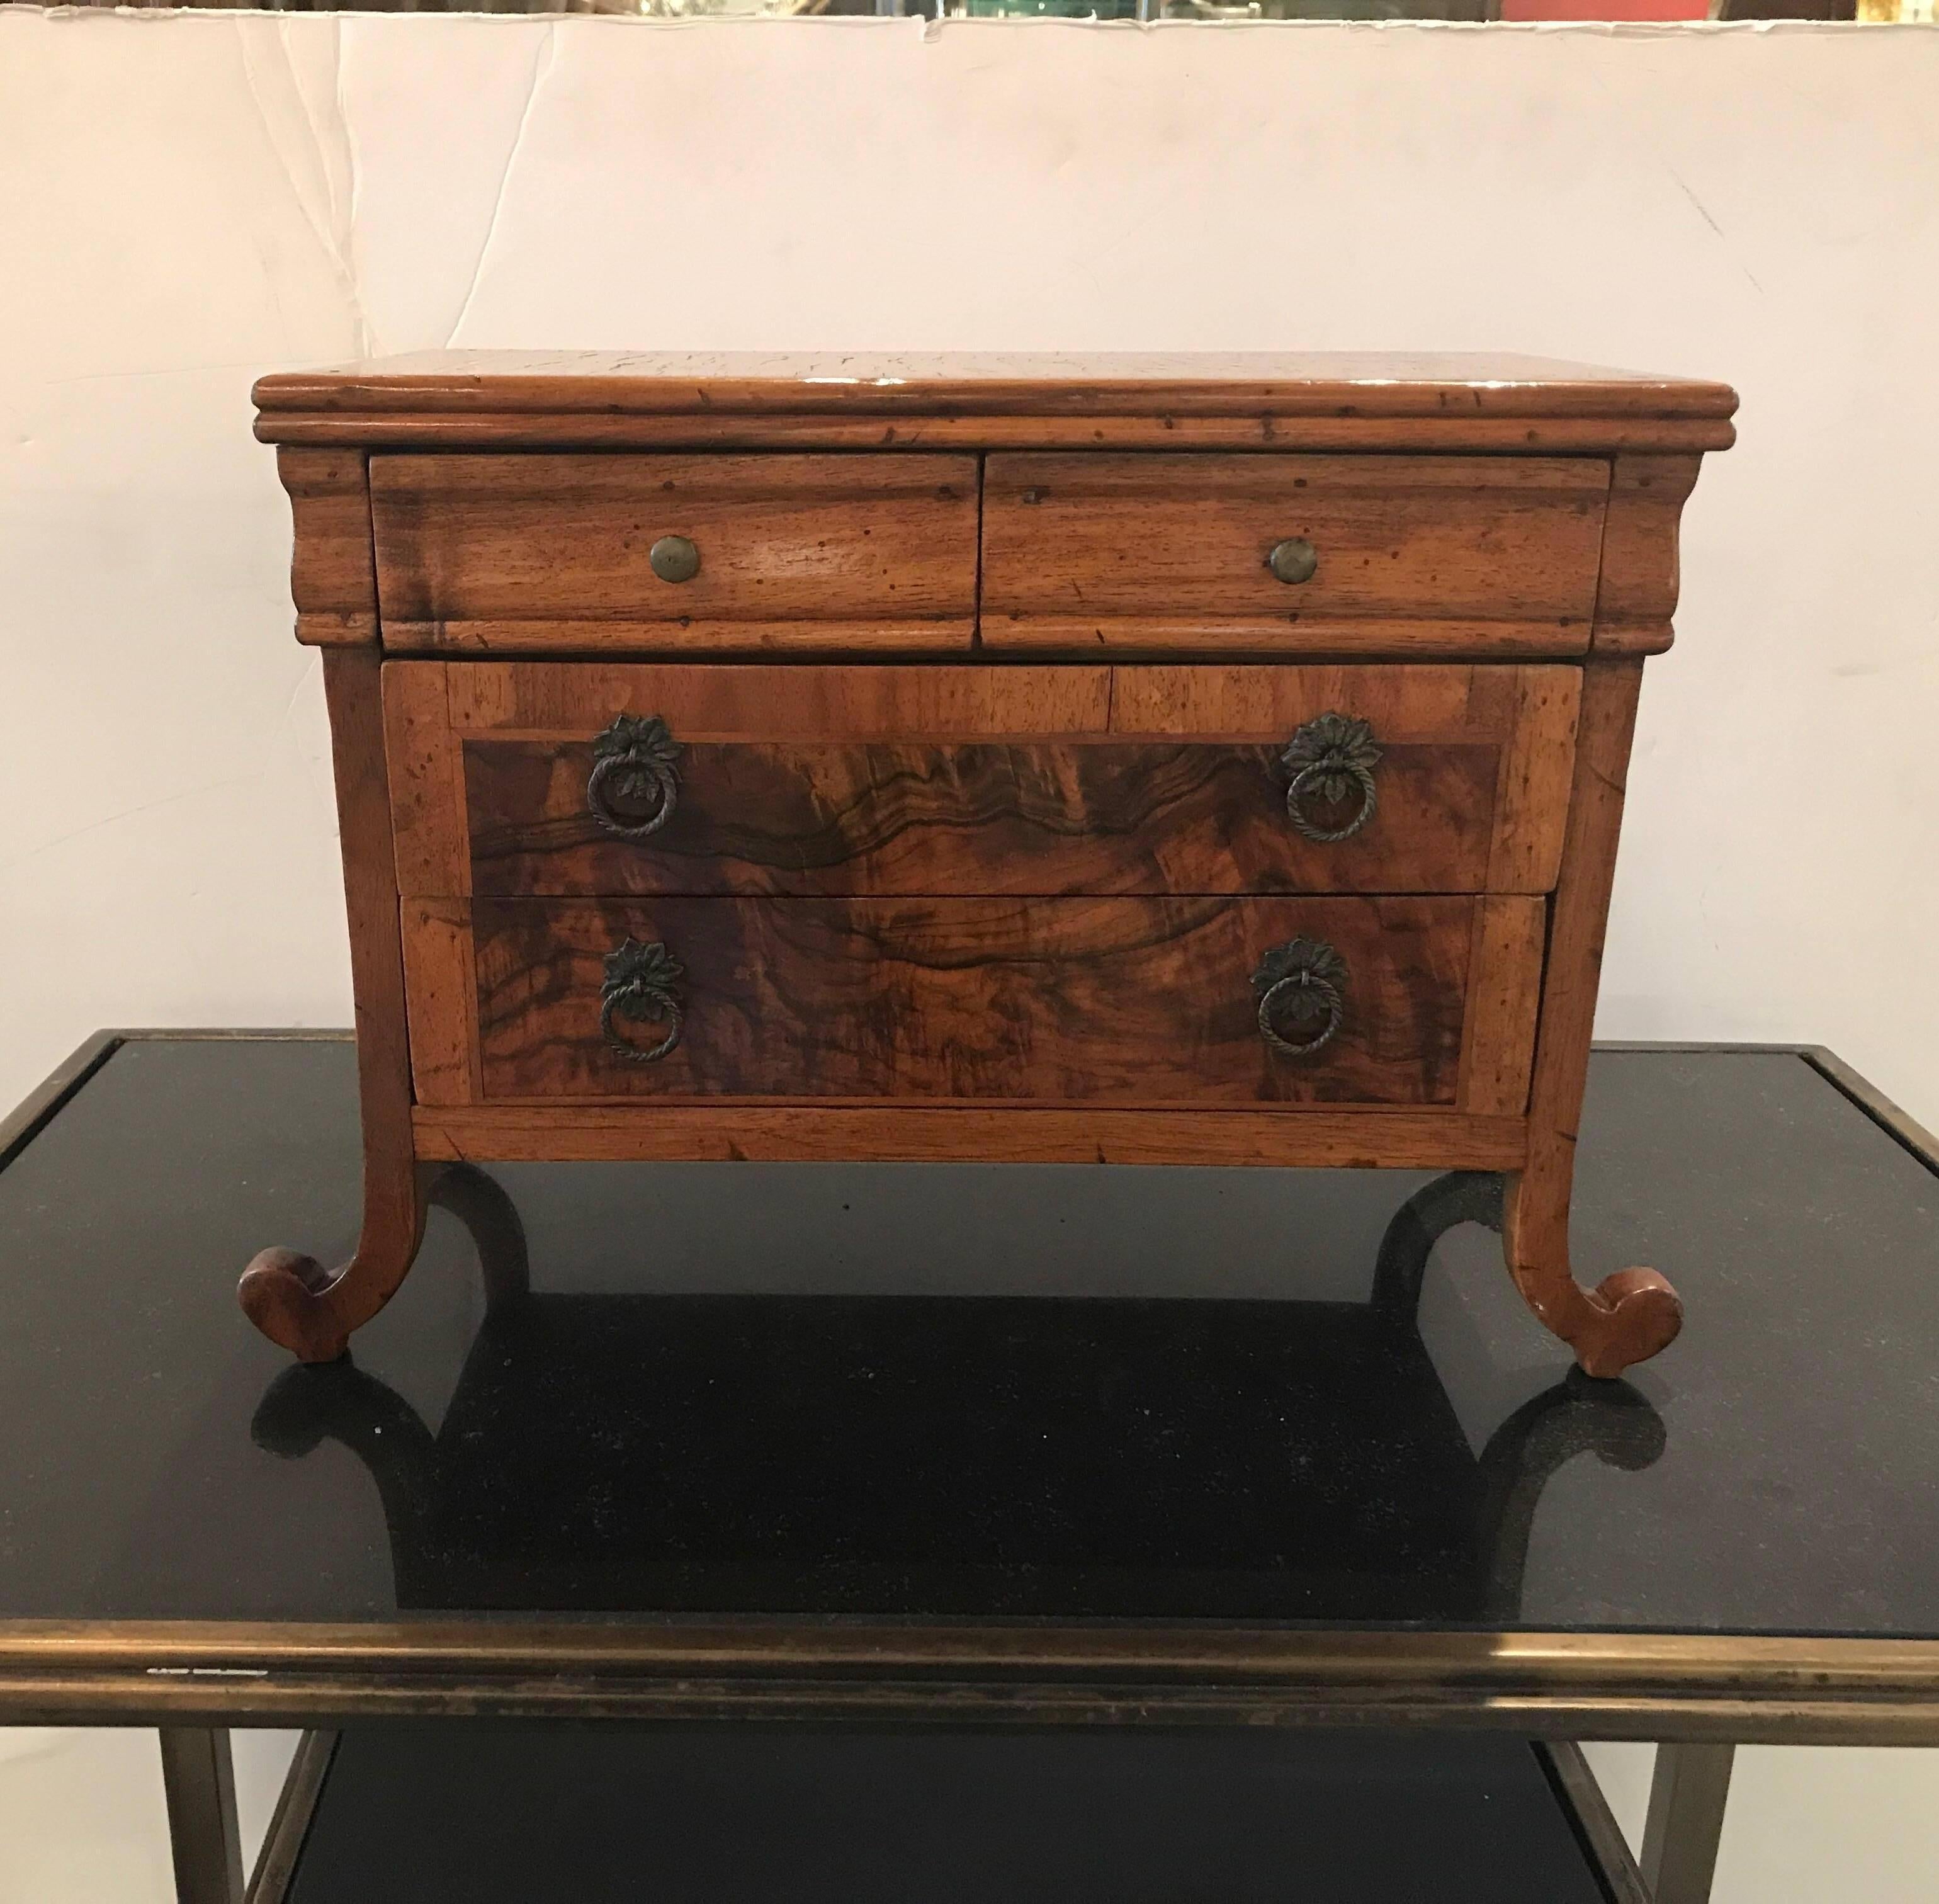 A handmade miniature chest of drawers with inlay. The walnut cabinet with burl wood inlaid panels. Two small drawers over two larger drawers resting on four scrolled and flared feet. The drawers have been relined in a simple red velvet.